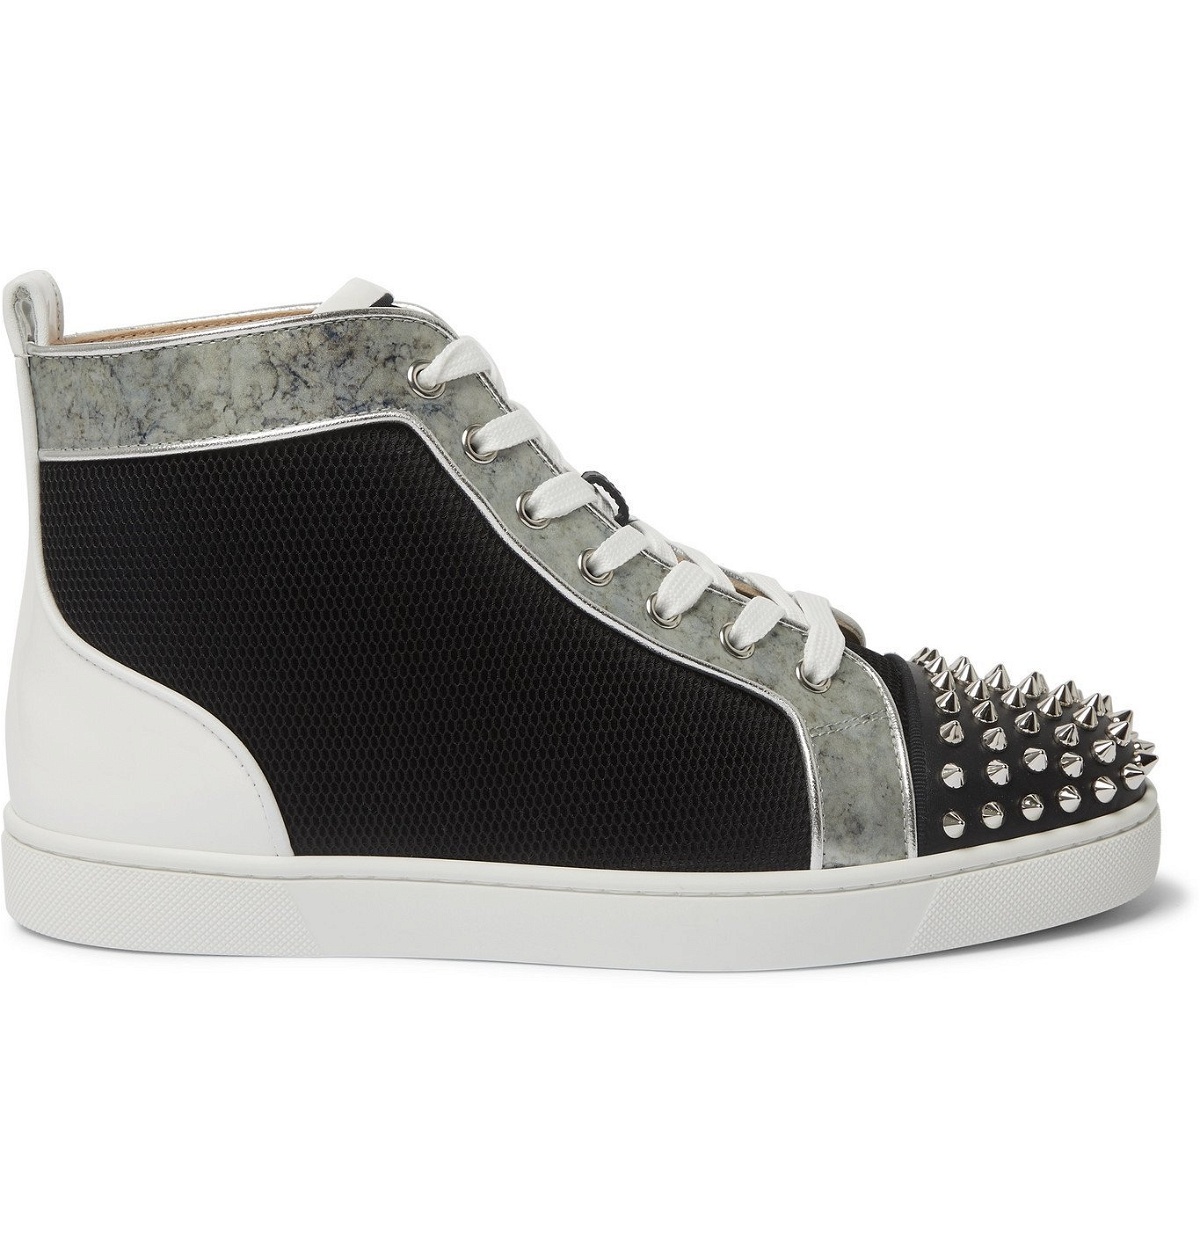 Christian Louboutin Black/Red Leather and Suede Louis Spike High